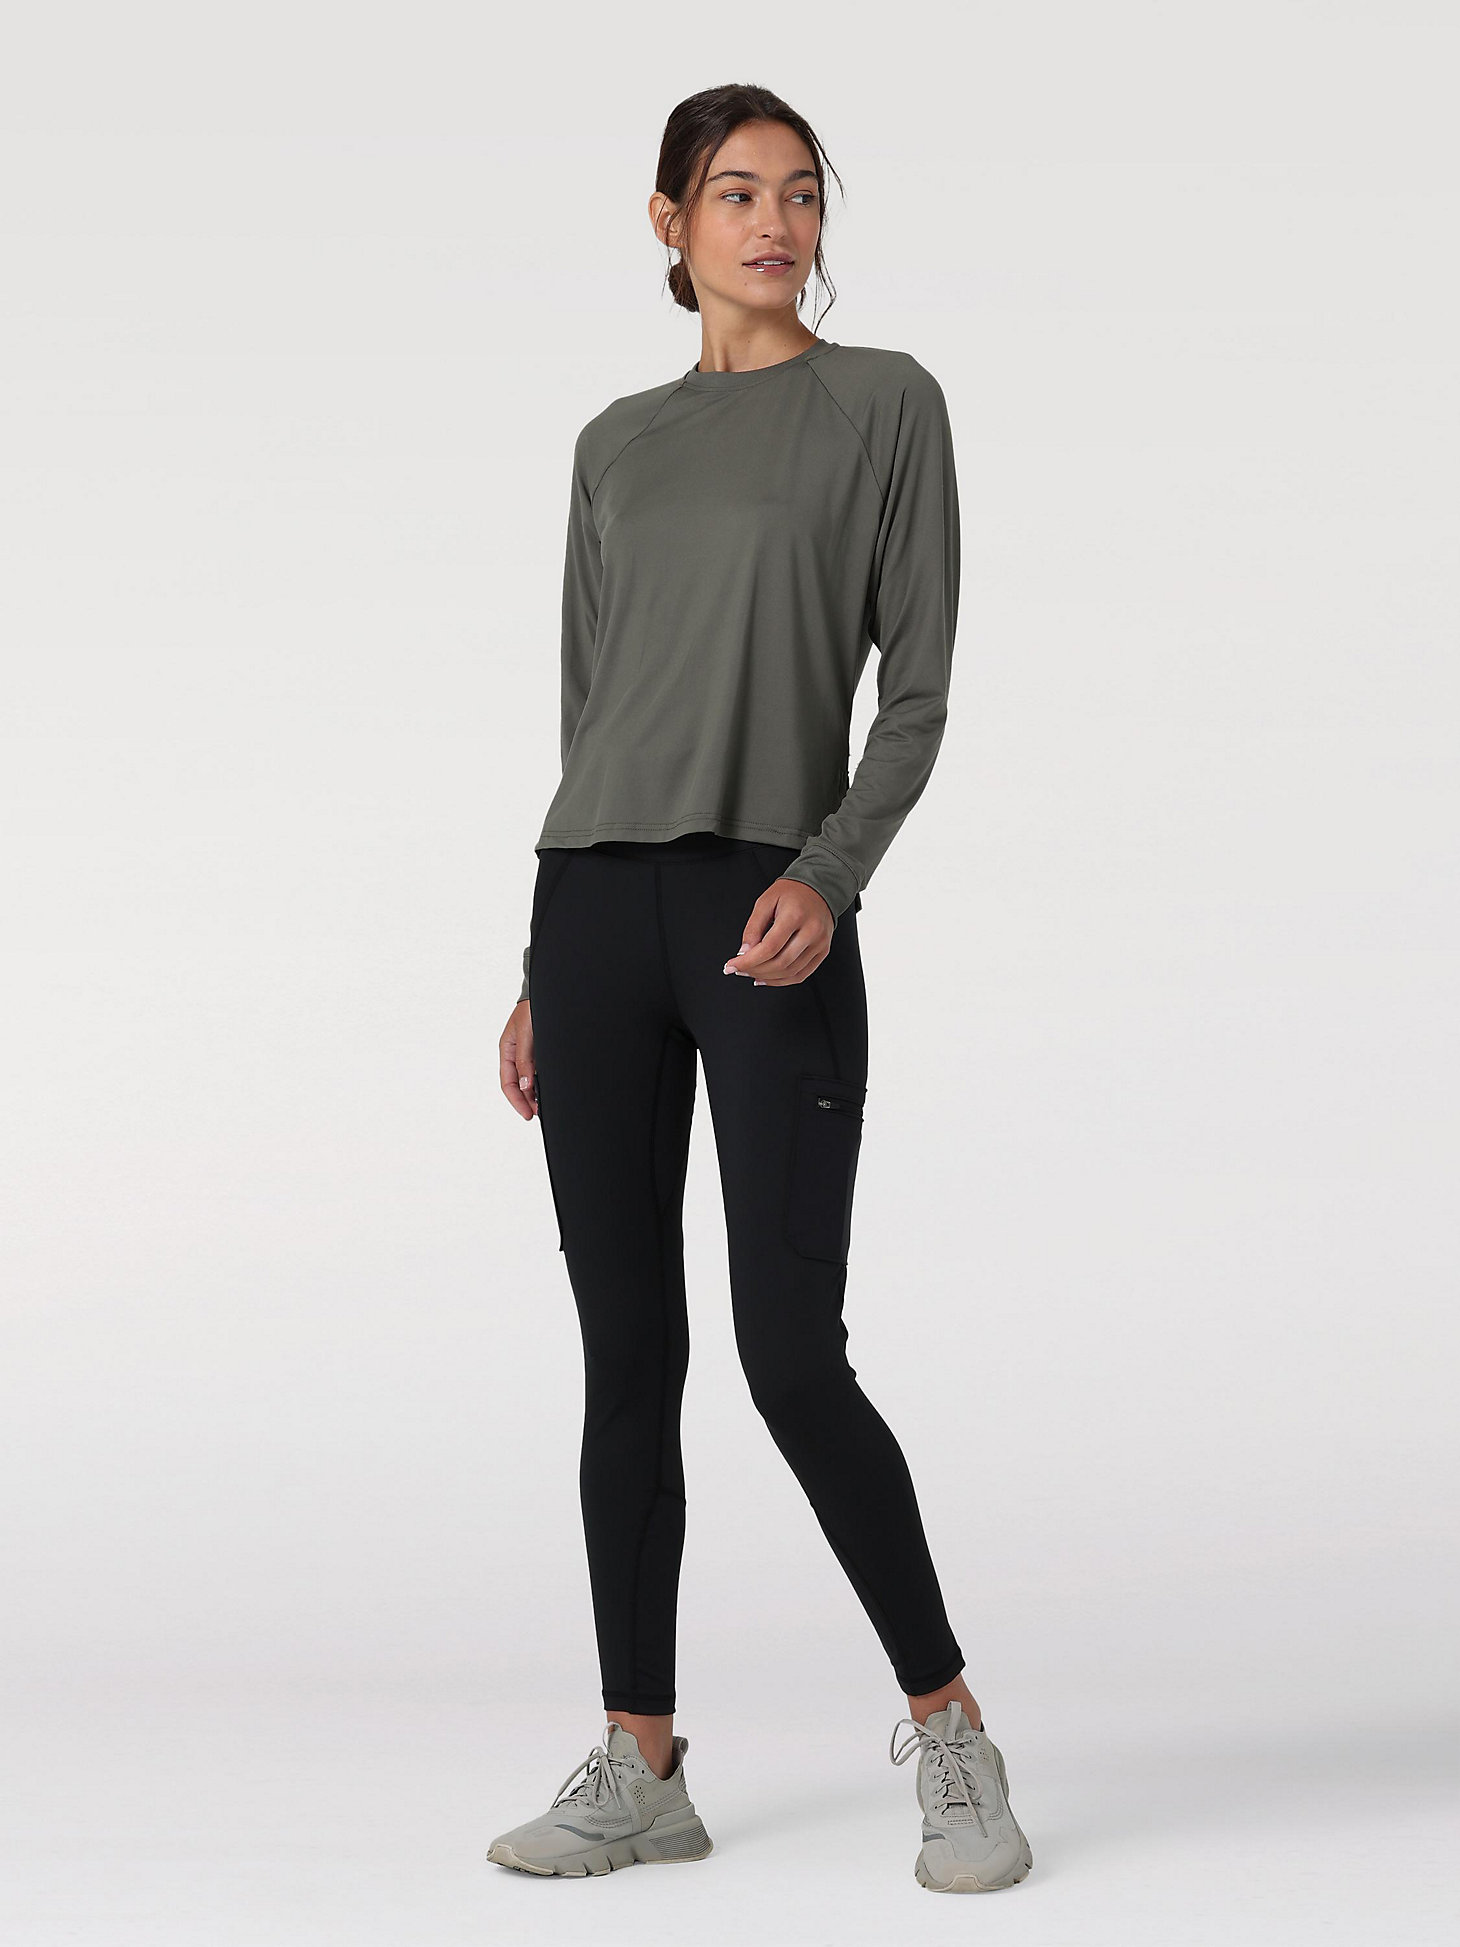 Long Sleeve Performance Tee in Dusty Olive alternative view 1